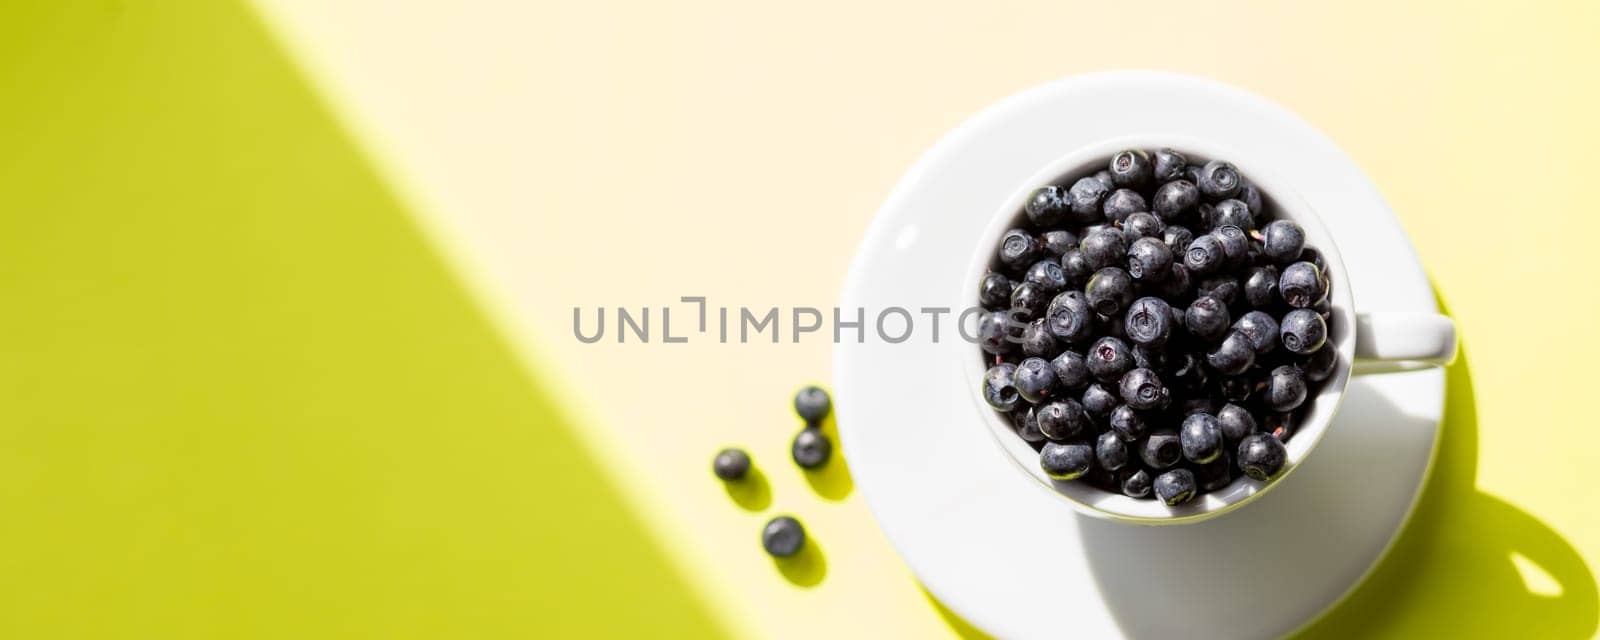 Fresh raw organic farm blueberry in white cup on yellow kitchen background, copy space.Summer seasonal natural vitamines and antioxidants. Healthy diet and nutrition concept. by YuliaYaspe1979